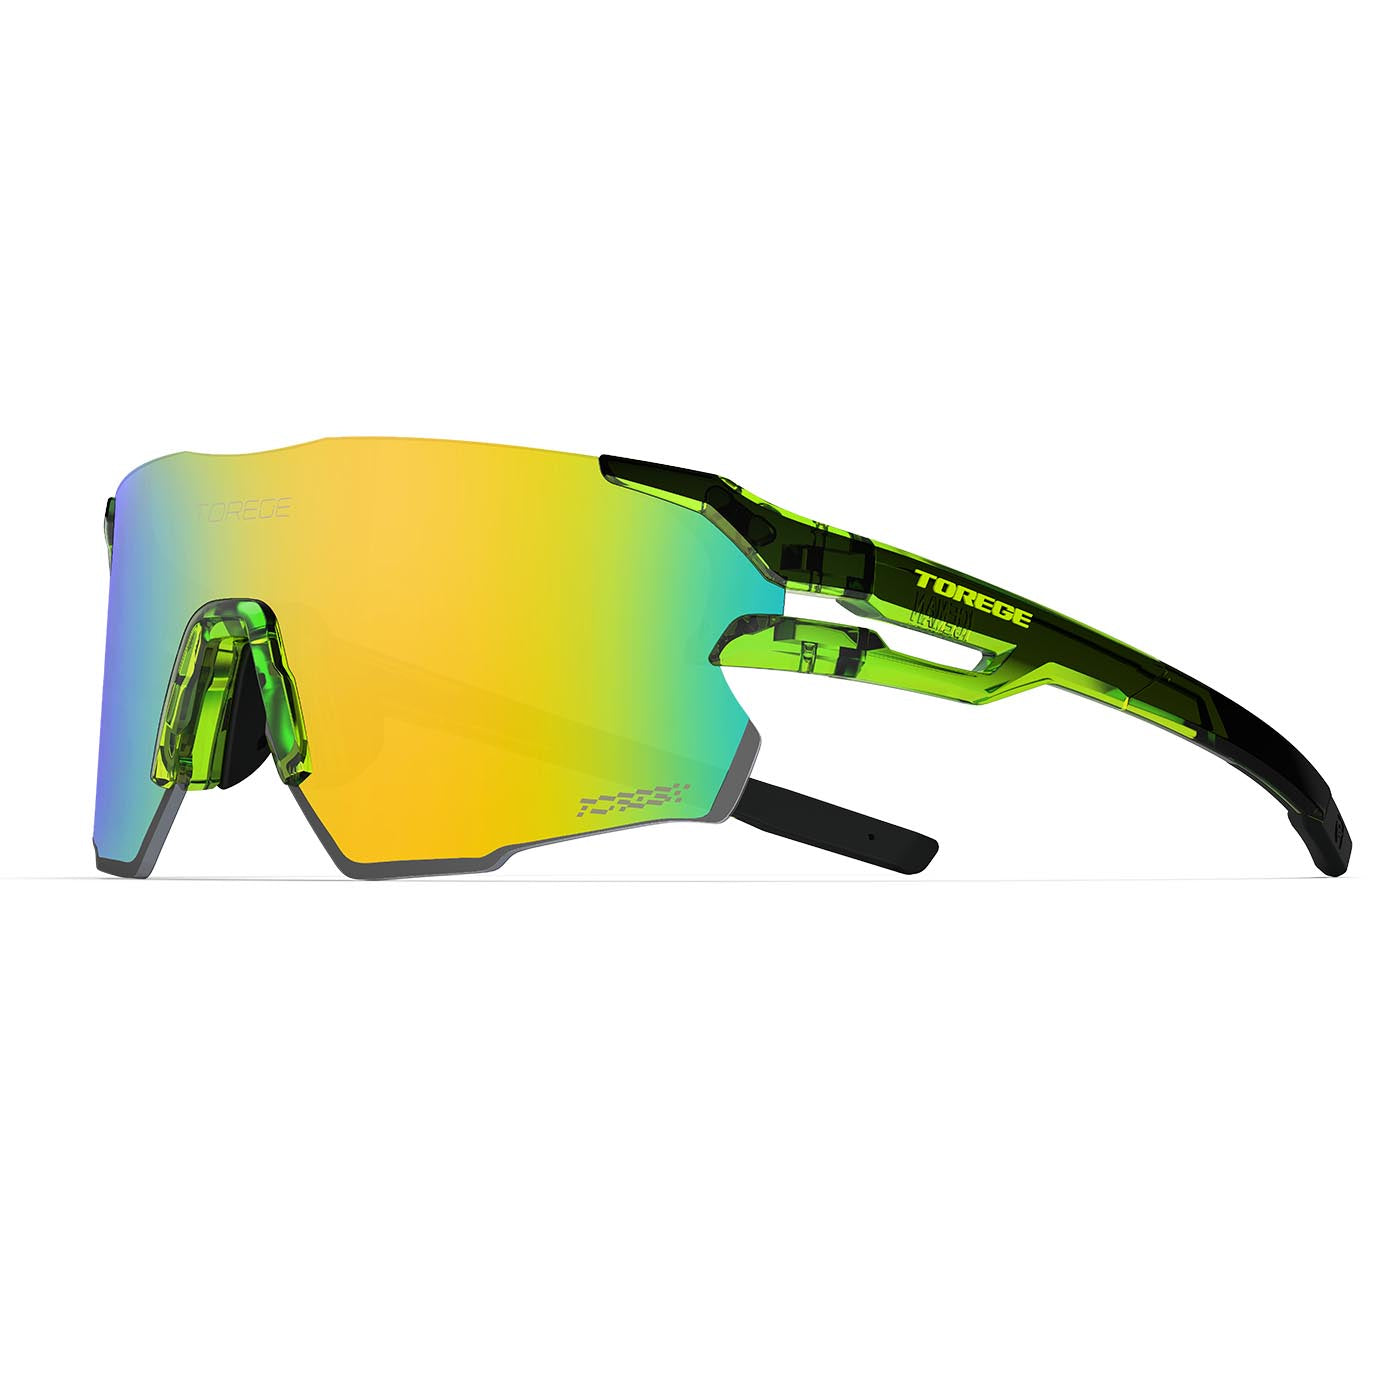 Sunlight Orange and Active Men Women Sport and for Wraparound - Running for Black Lens Fishing, & Lifetime Lightweight Resplenden Warranty Sunglasses With Ultra Frame Golf, - Perfect Hiking, Cycling,